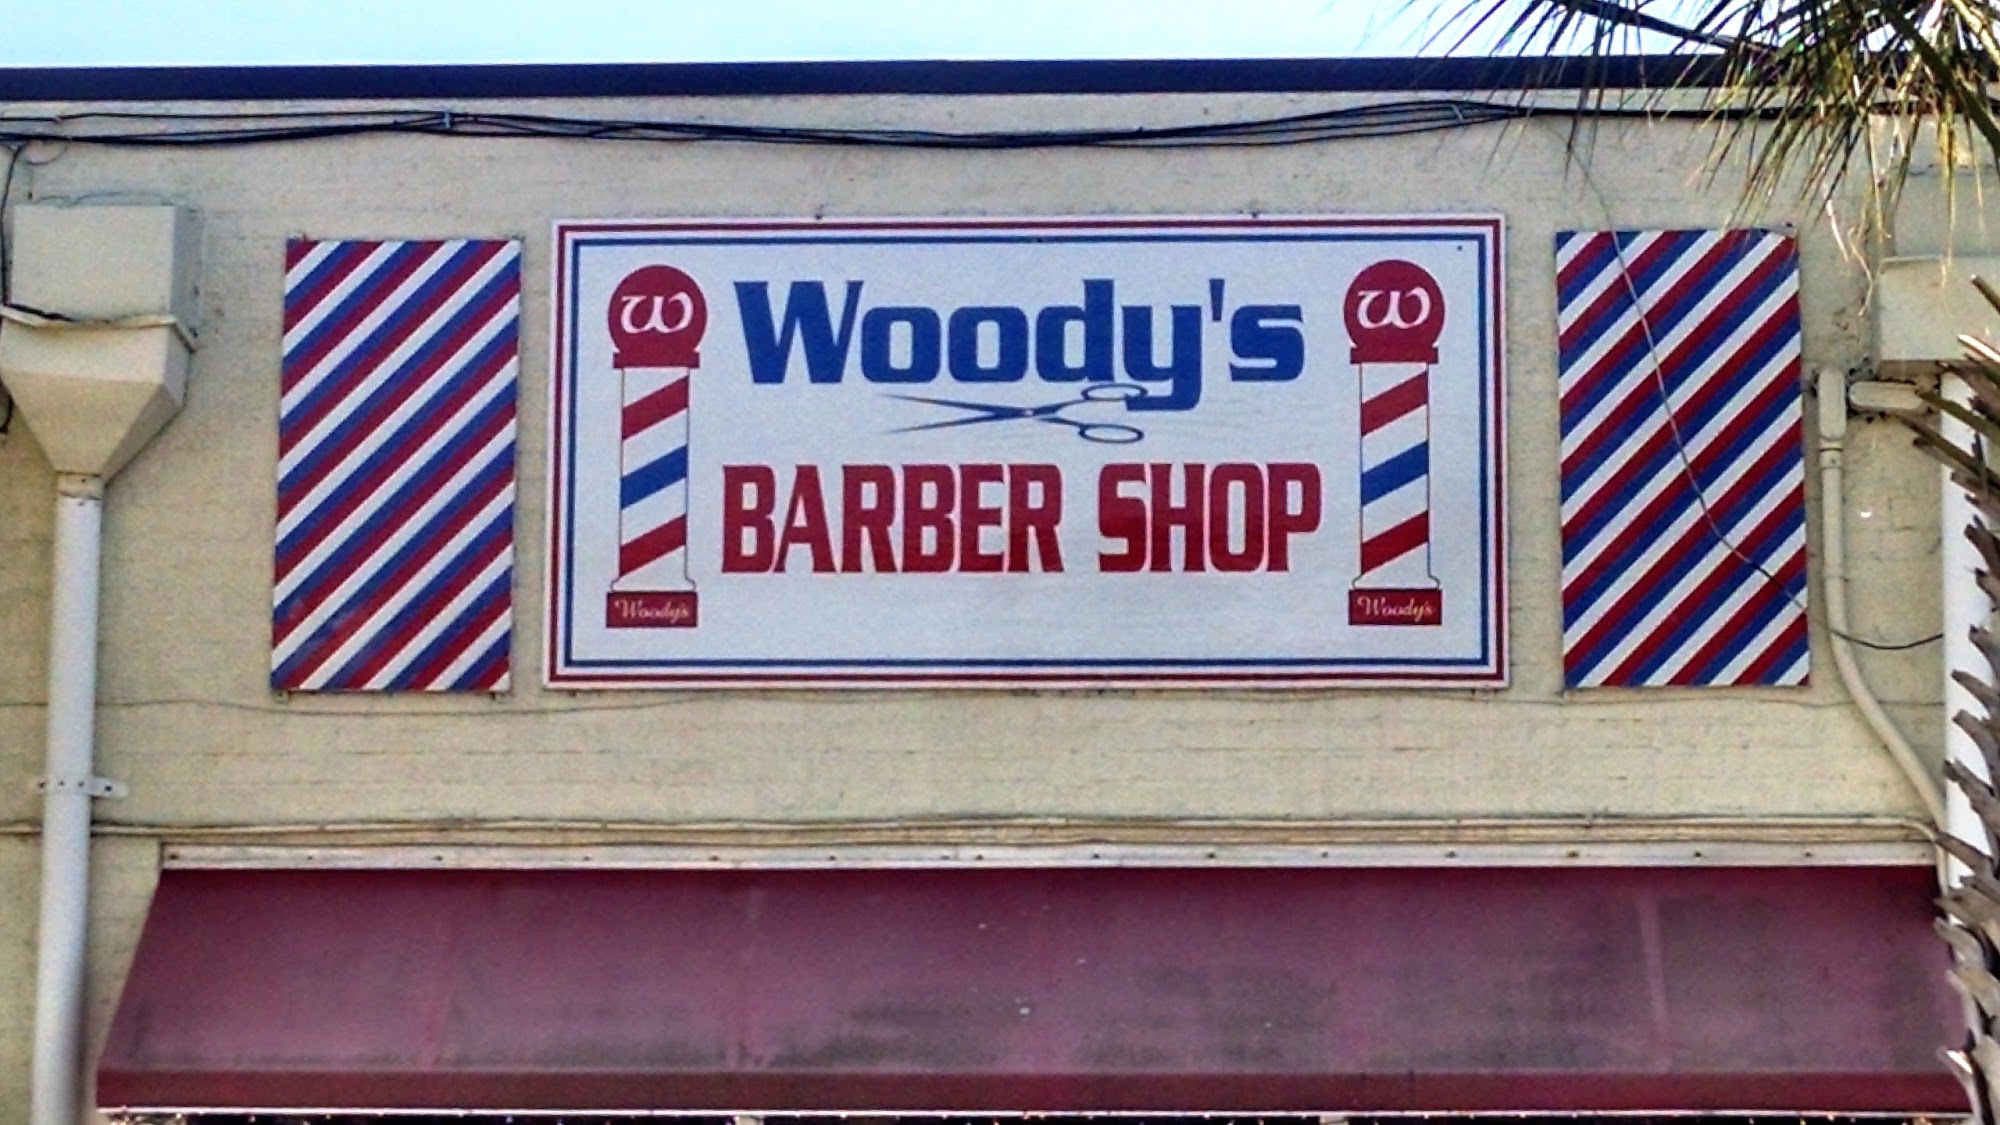 Woody's Barber Shop